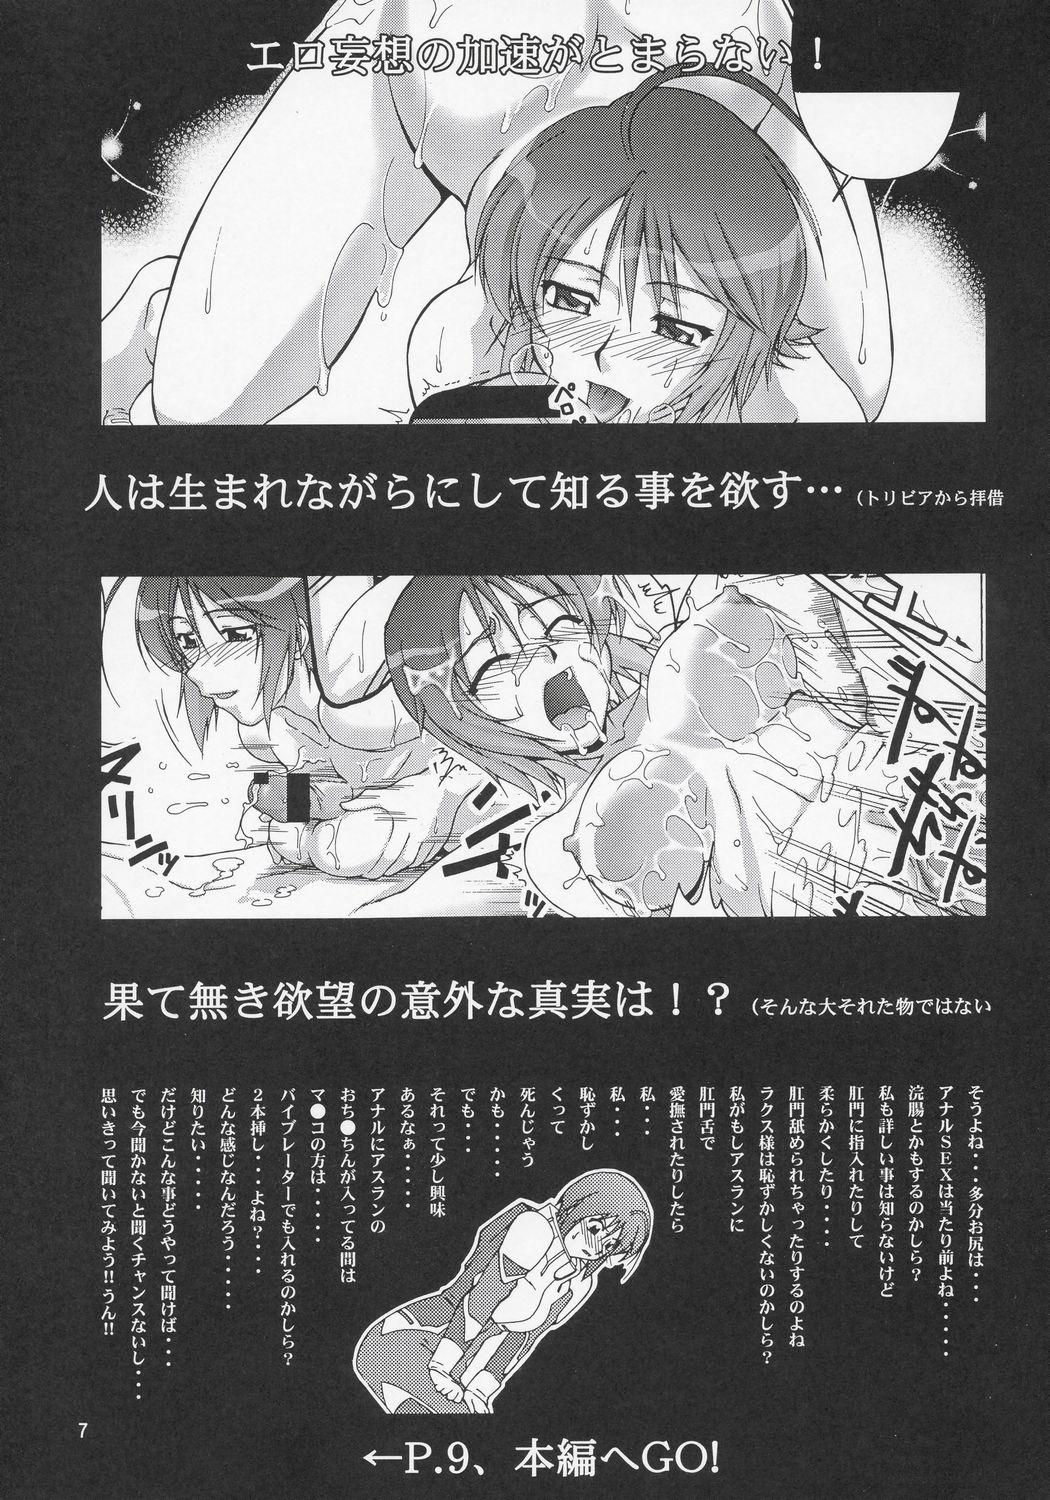 Homosexual Thank You! Lacus End - Gundam seed destiny Pain - Page 6